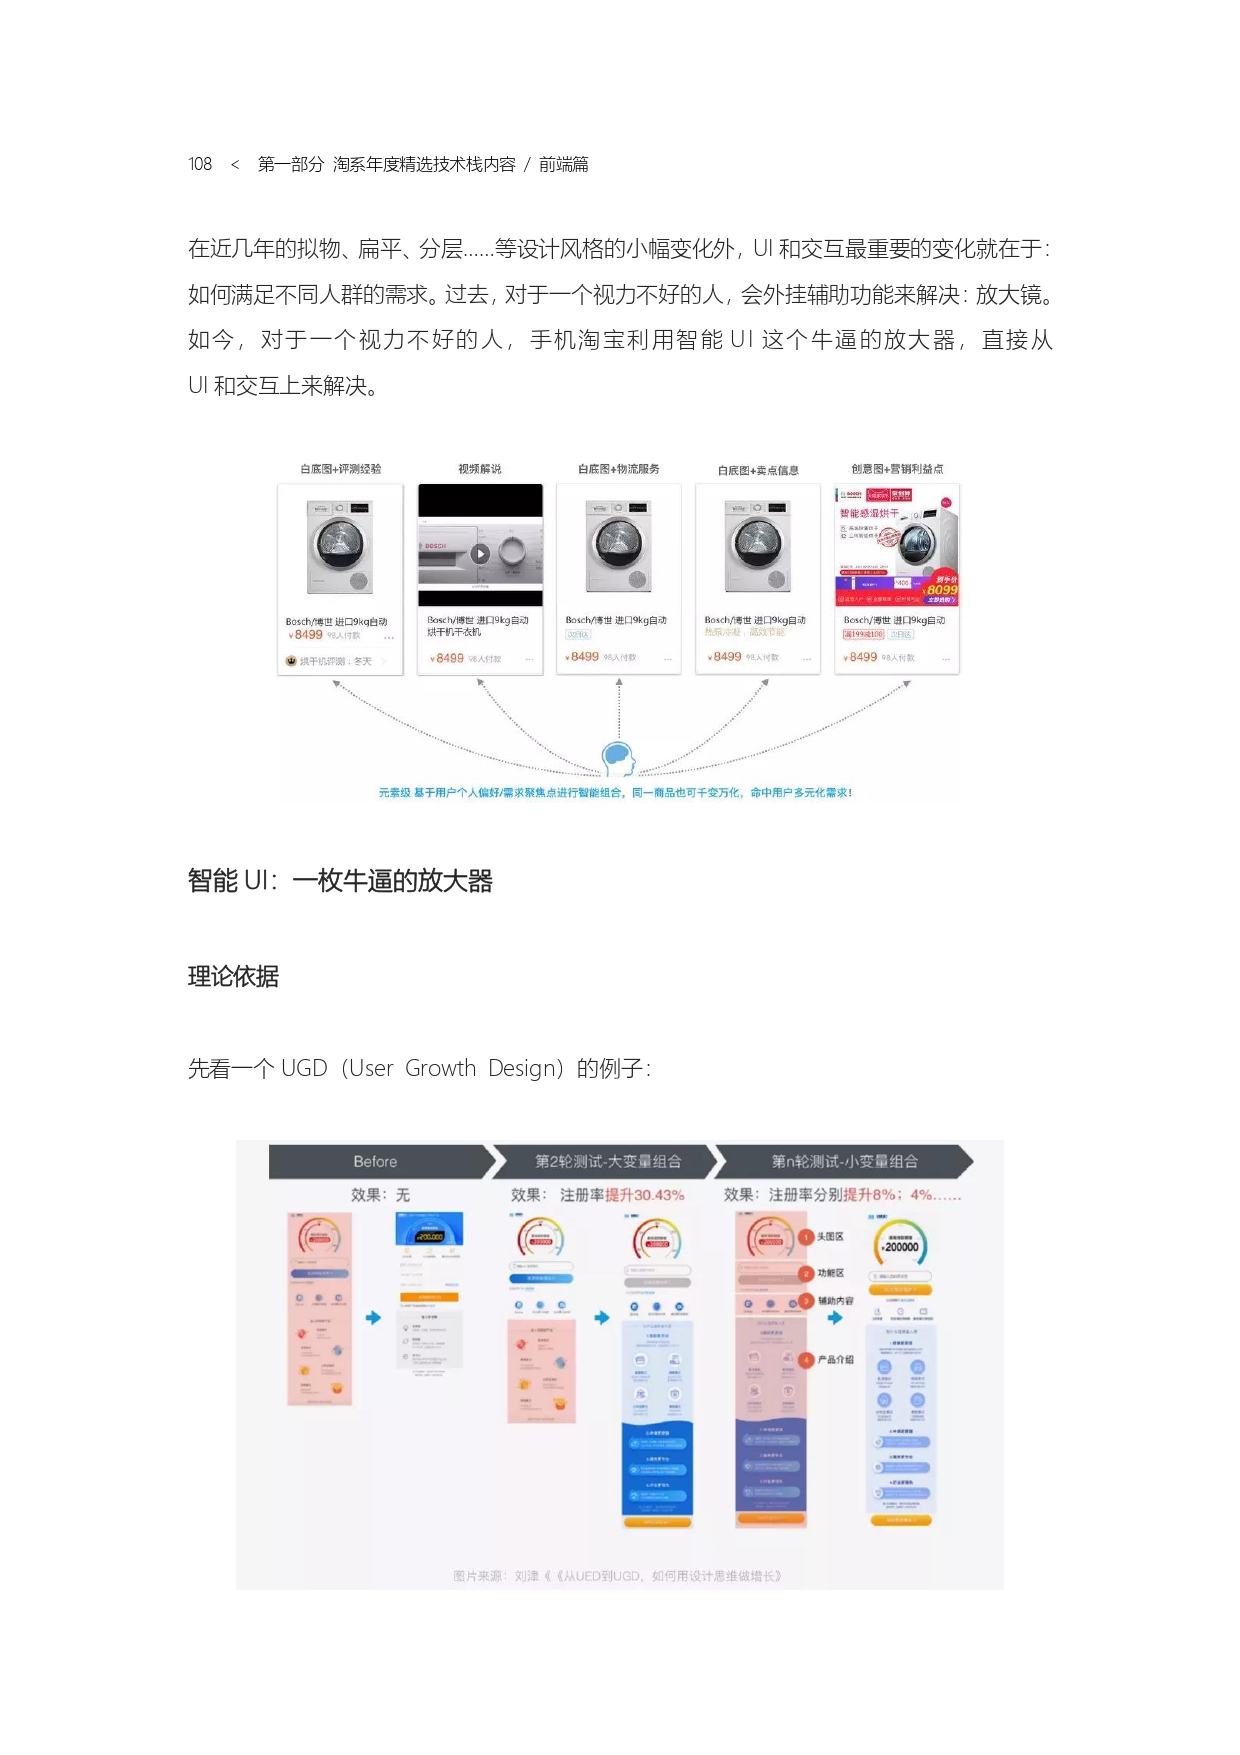 The Complete Works of Tao Technology 2020-1-570_page-0108.jpg